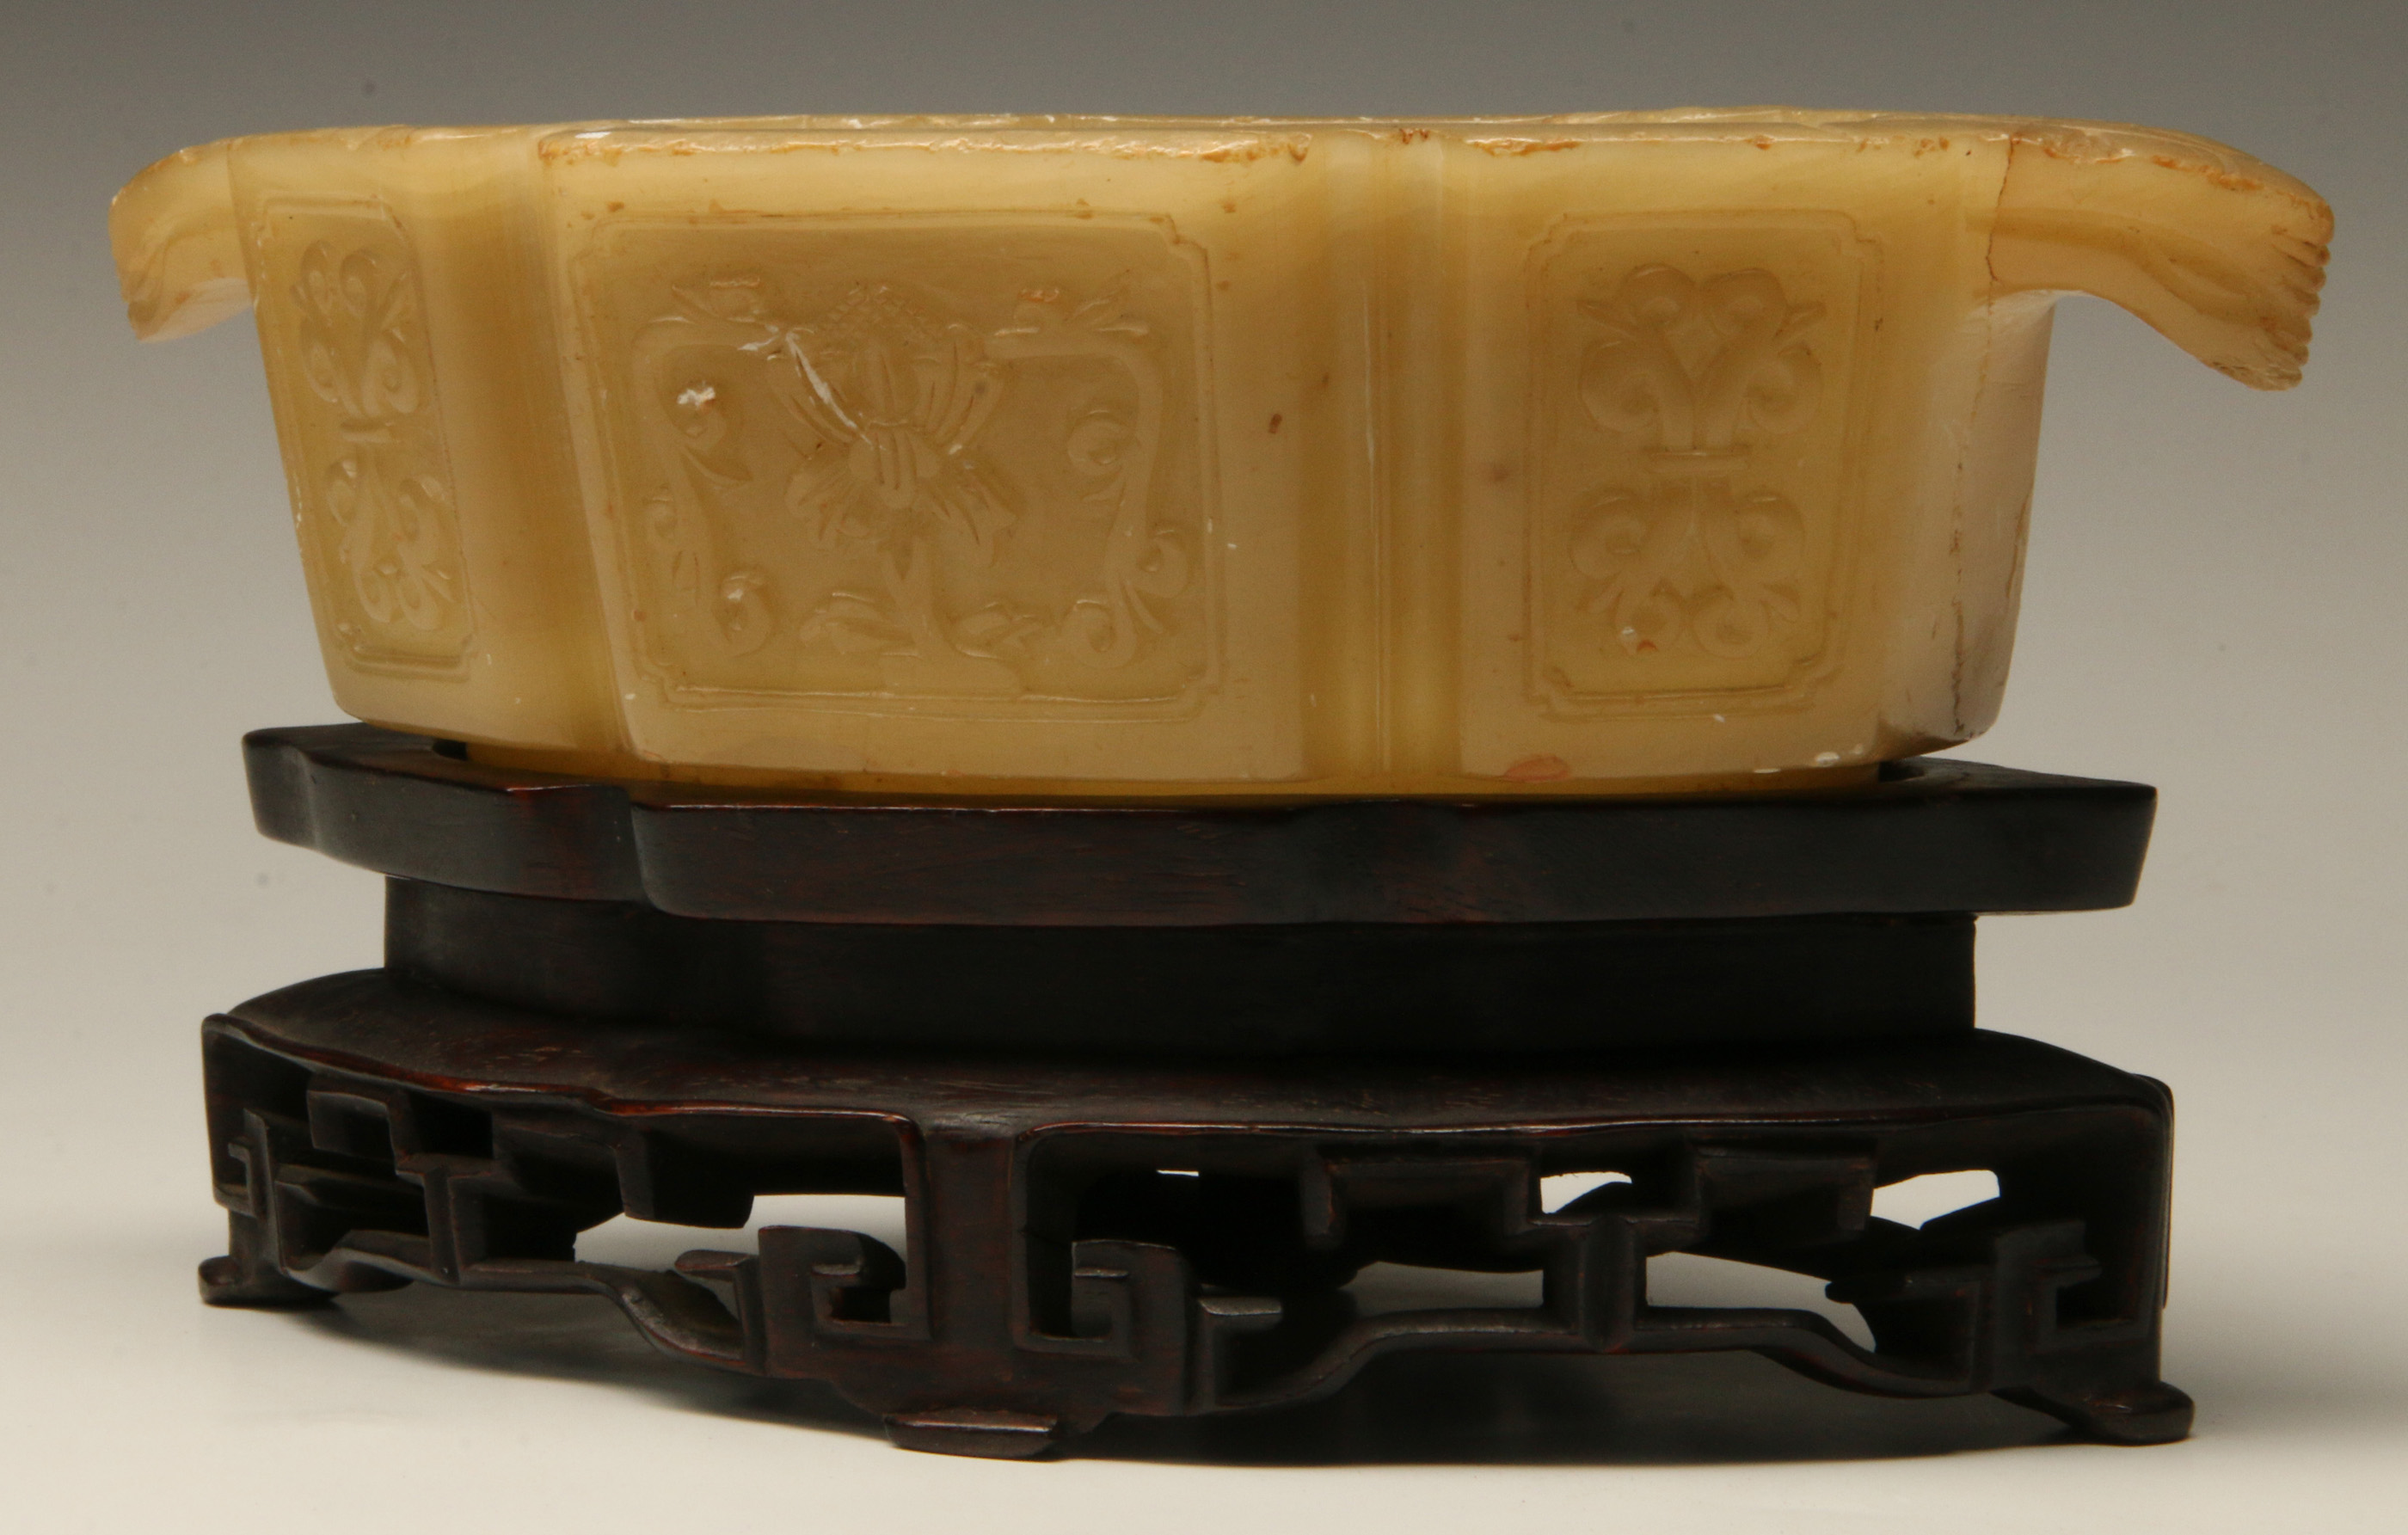 A CHINESE LOZENGE SHAPED JADE CUP ON STAND